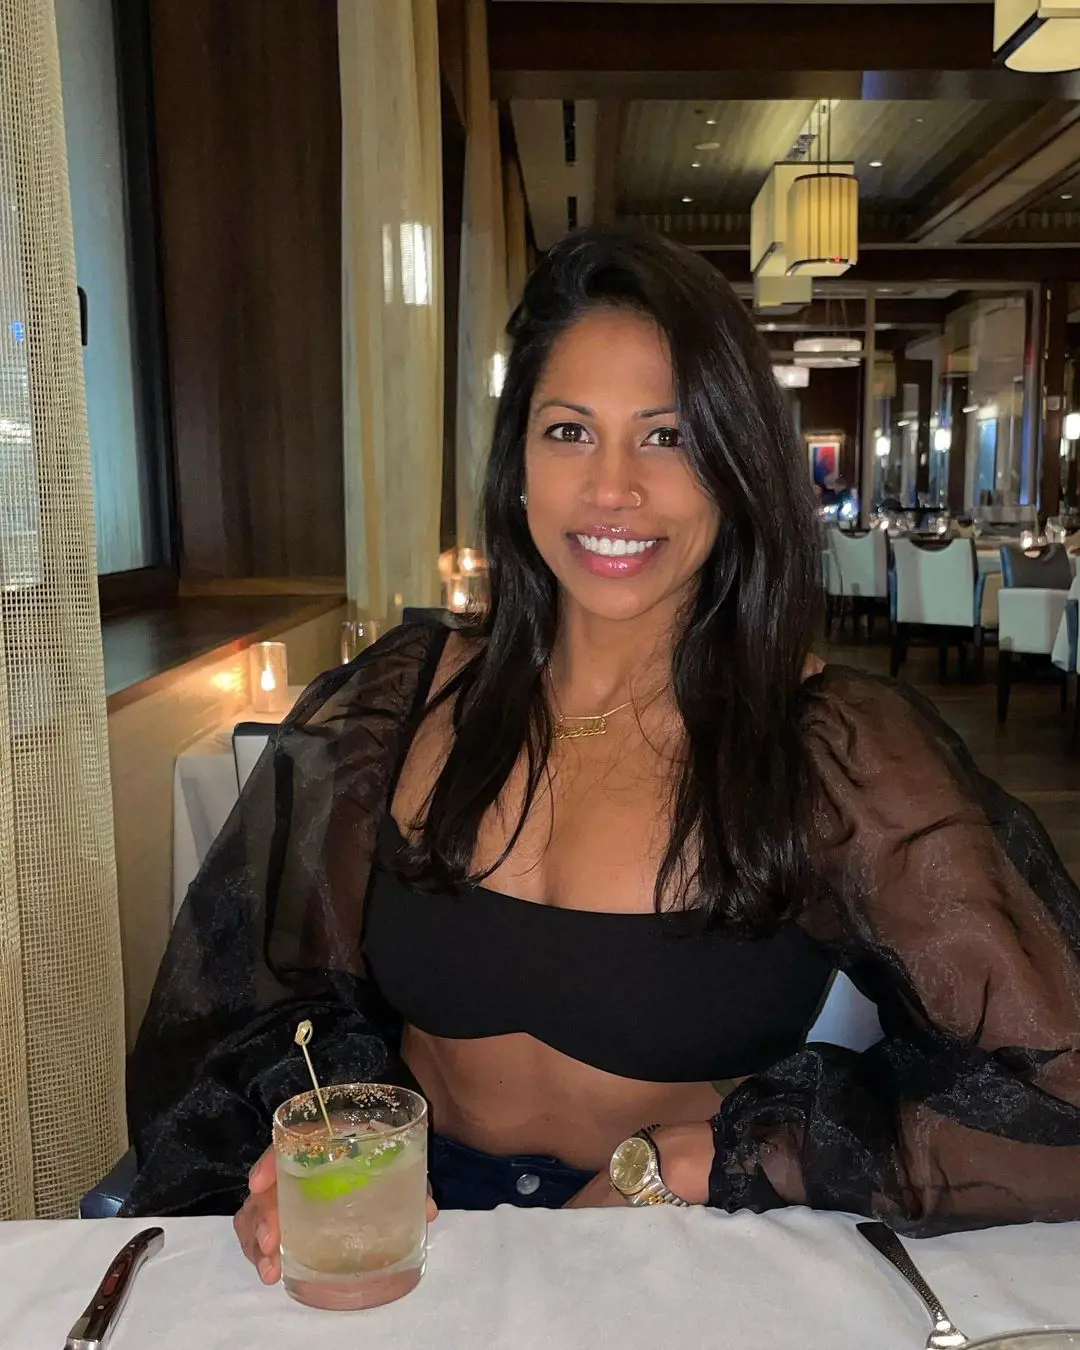 Natalie shared her photo at a beautiful date night in Hard Rock Hotel